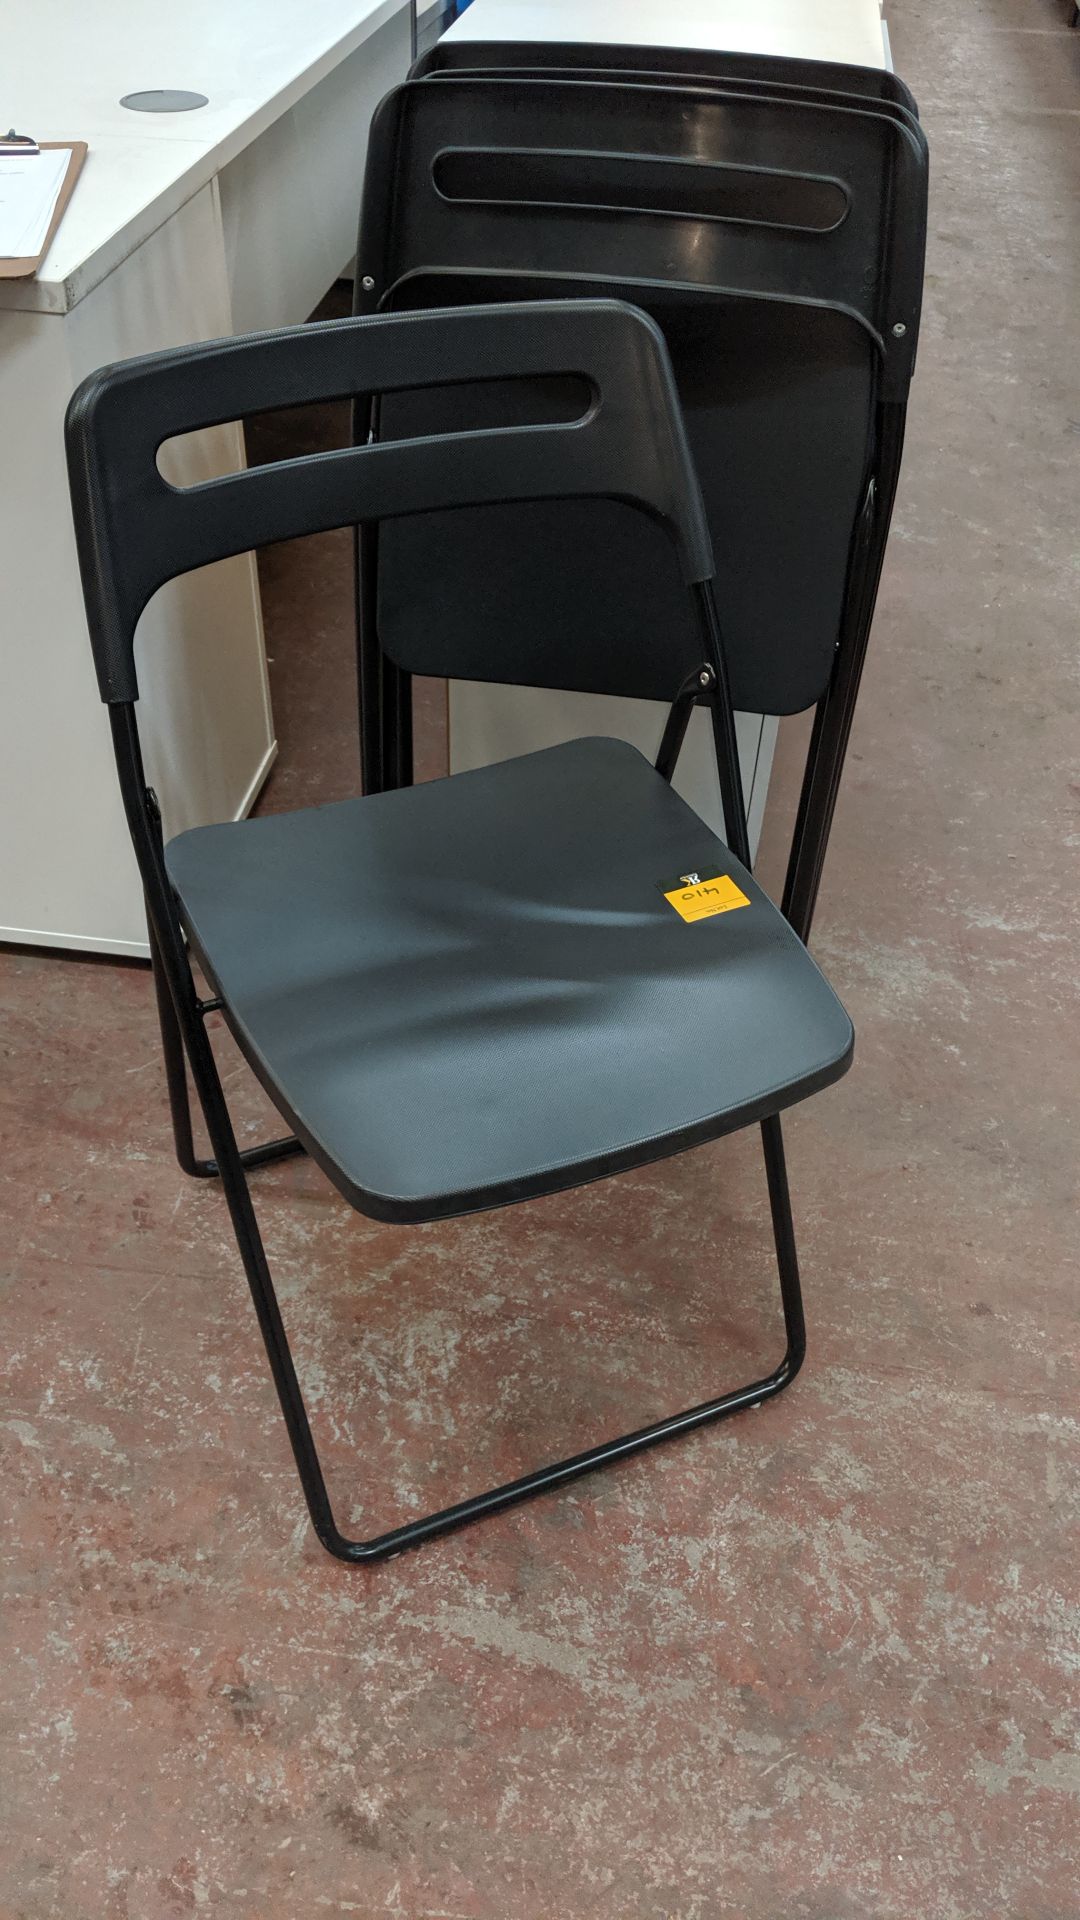 4 off black folding chairs. This is one of a large number of lots used/owned by One To One (North